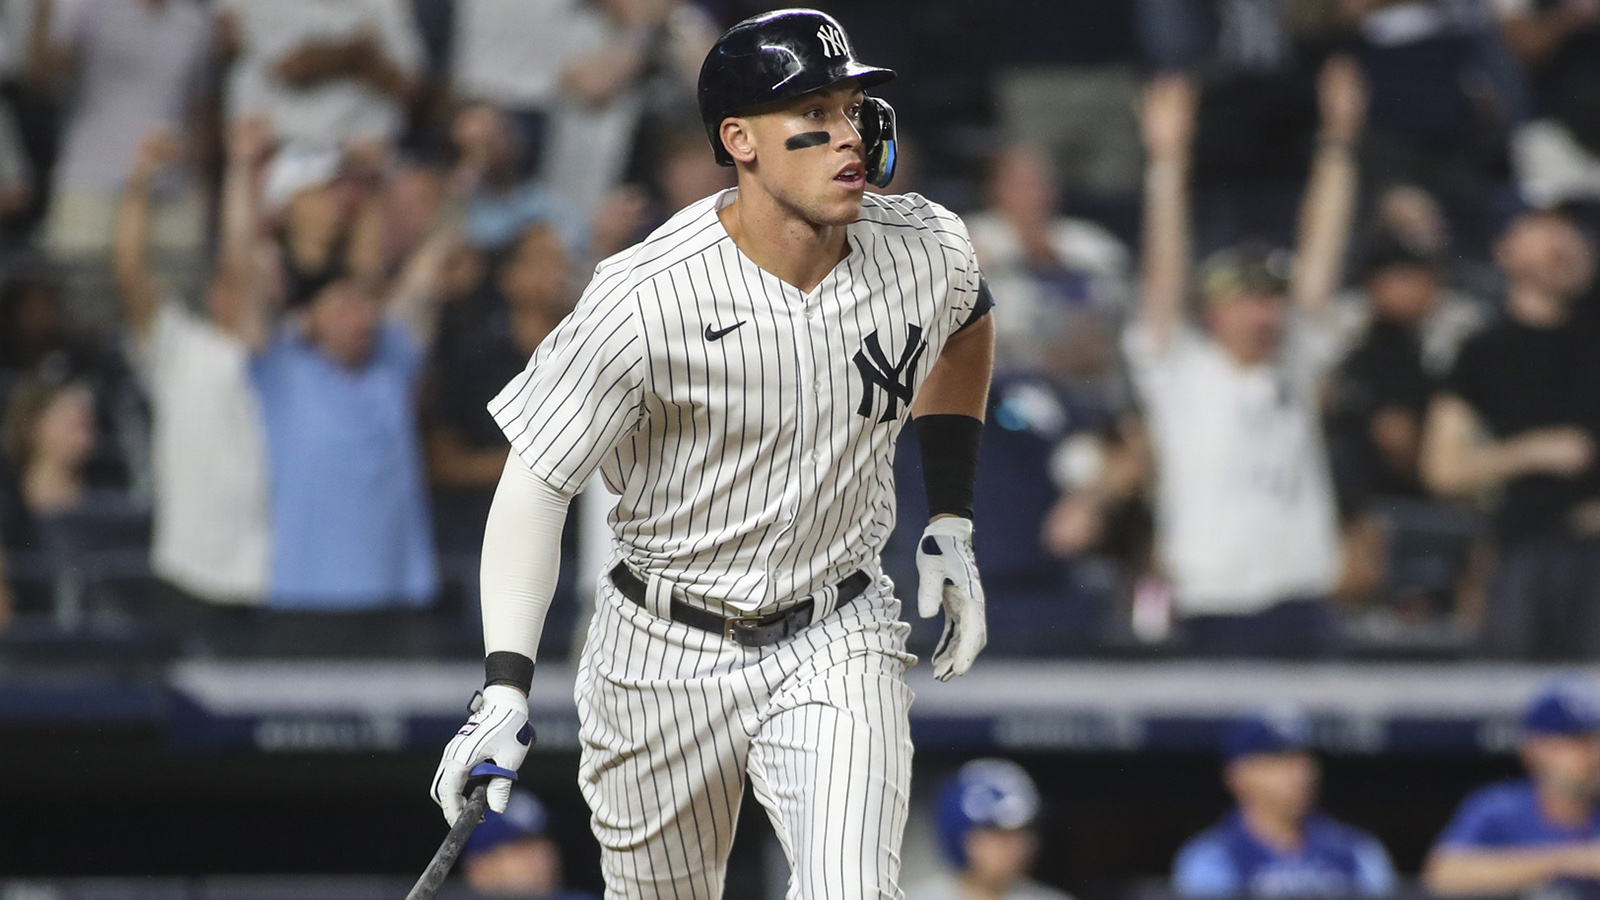 Aaron Judge spurns SF Giants, stays with New York Yankees